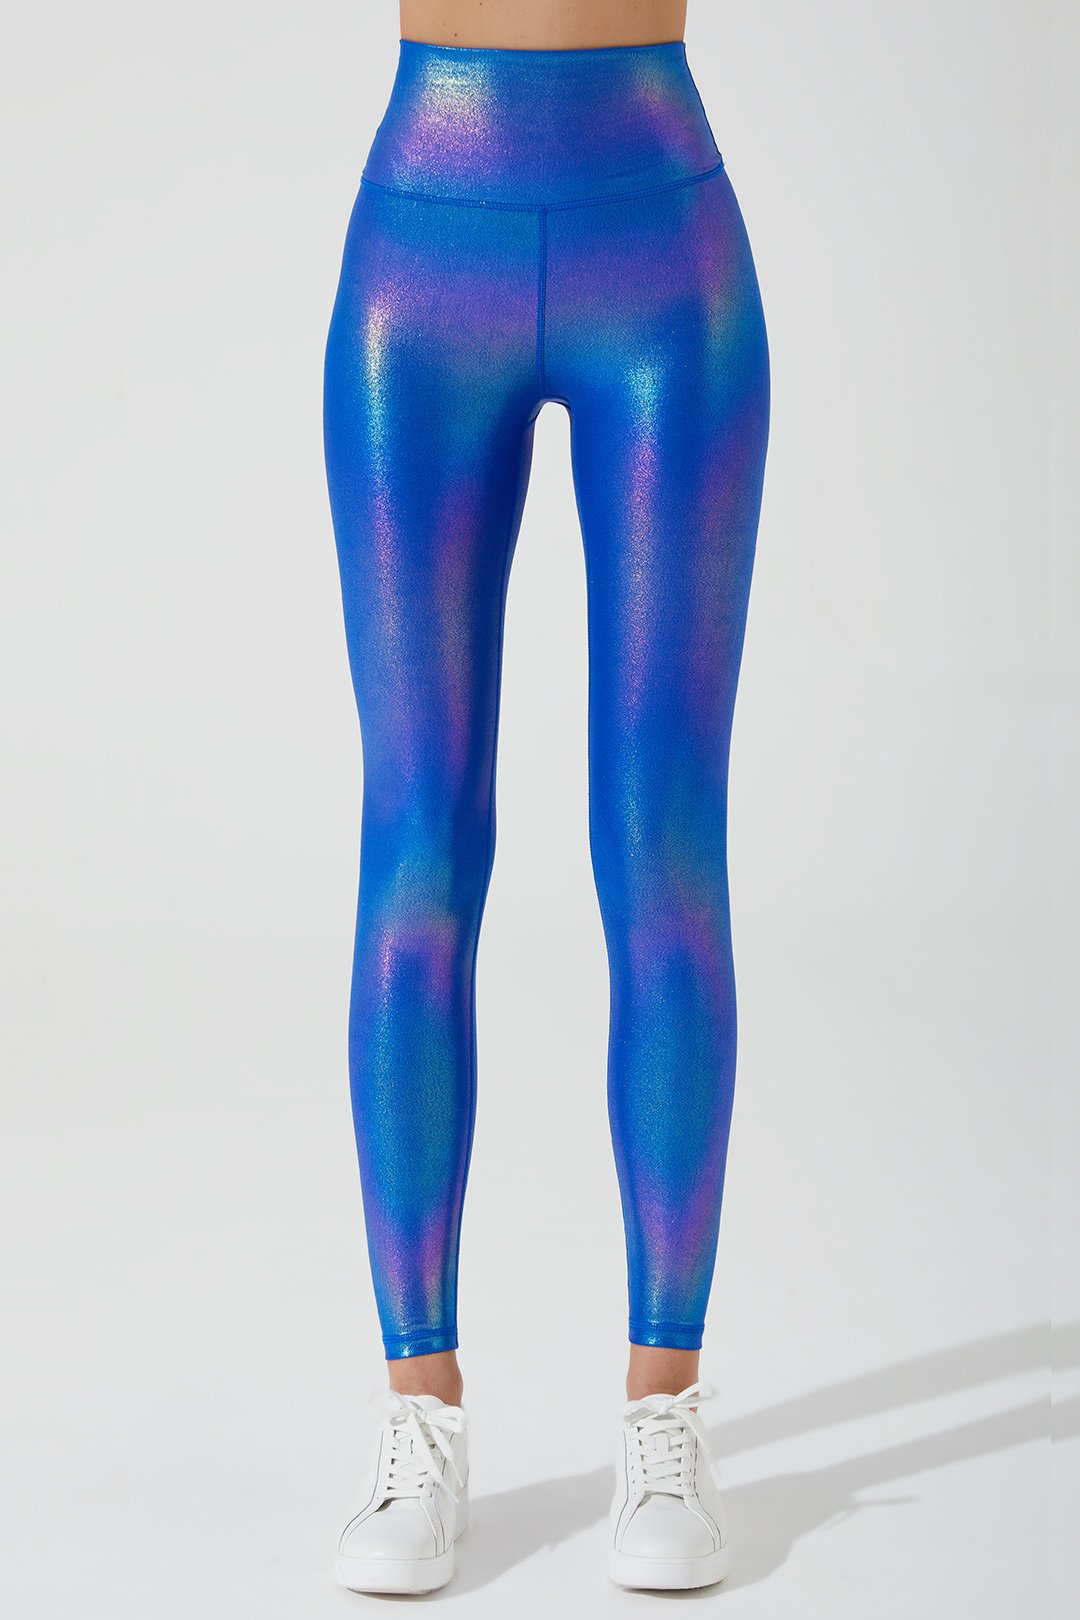 carbon38 Colorful Athletic Leggings for Women